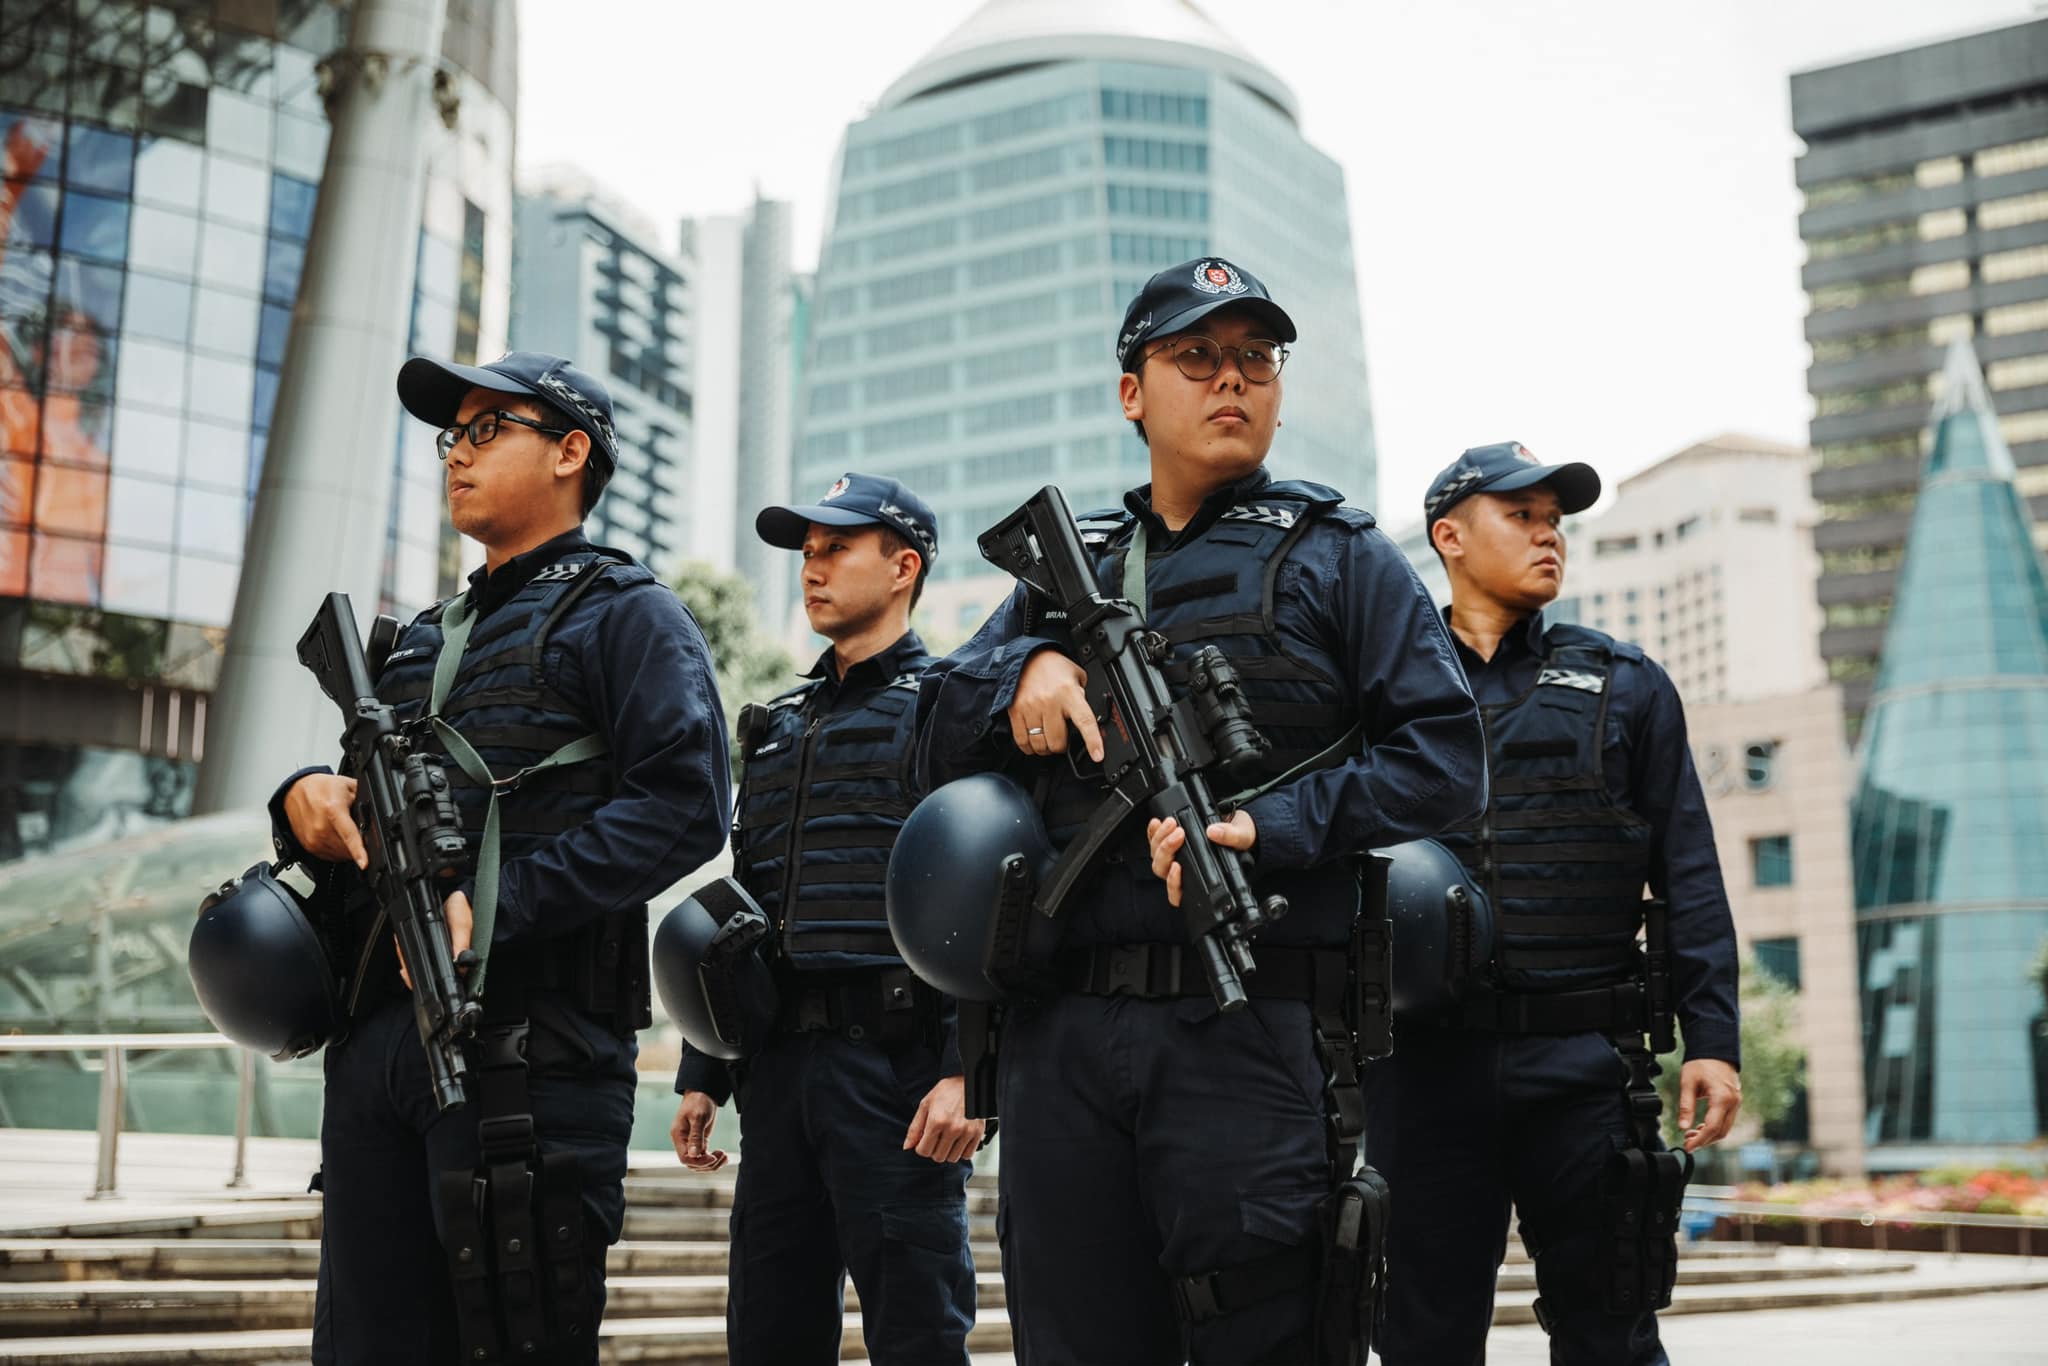 Officers from the singapore police force (spf)